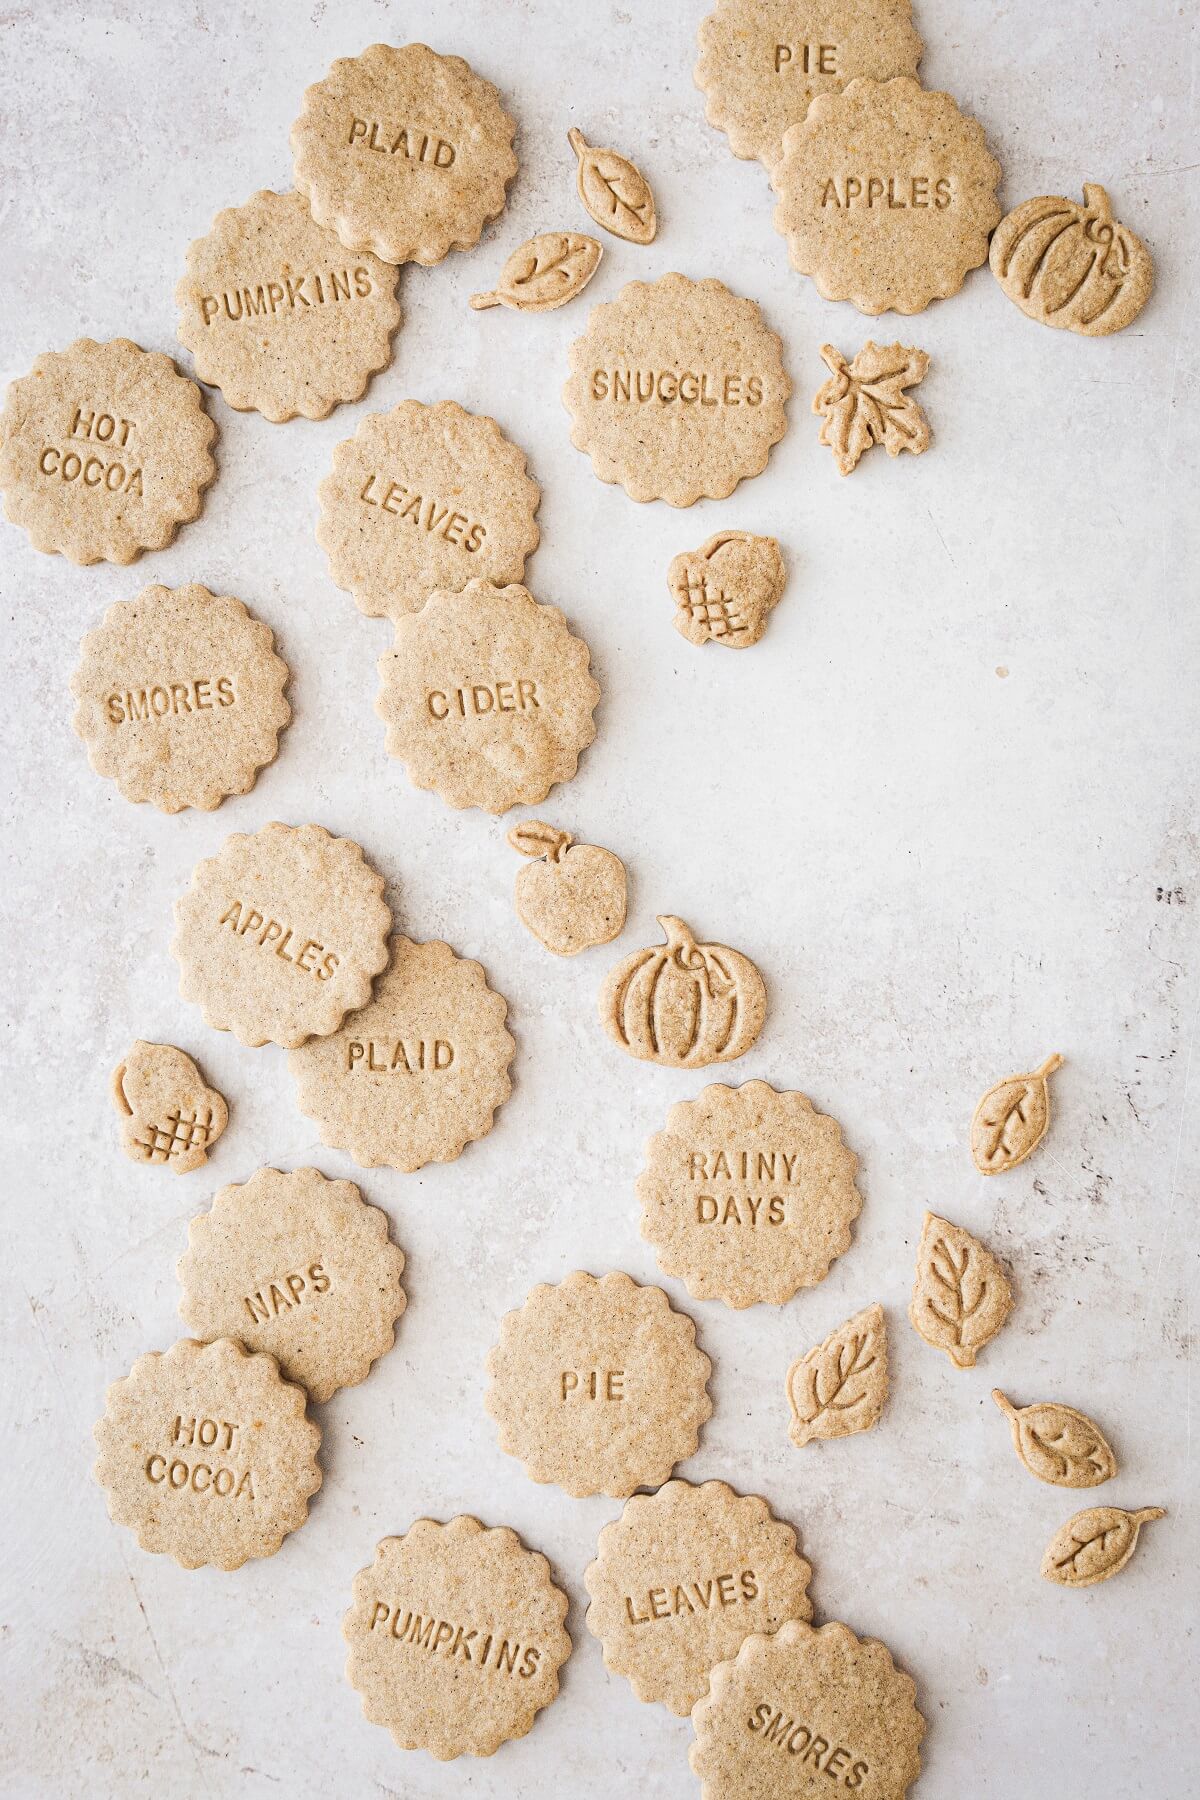 Pumpkin spice shortbread cookies stamped with favorite fall things such as "apples", "hot cocoa", "pie", etc.